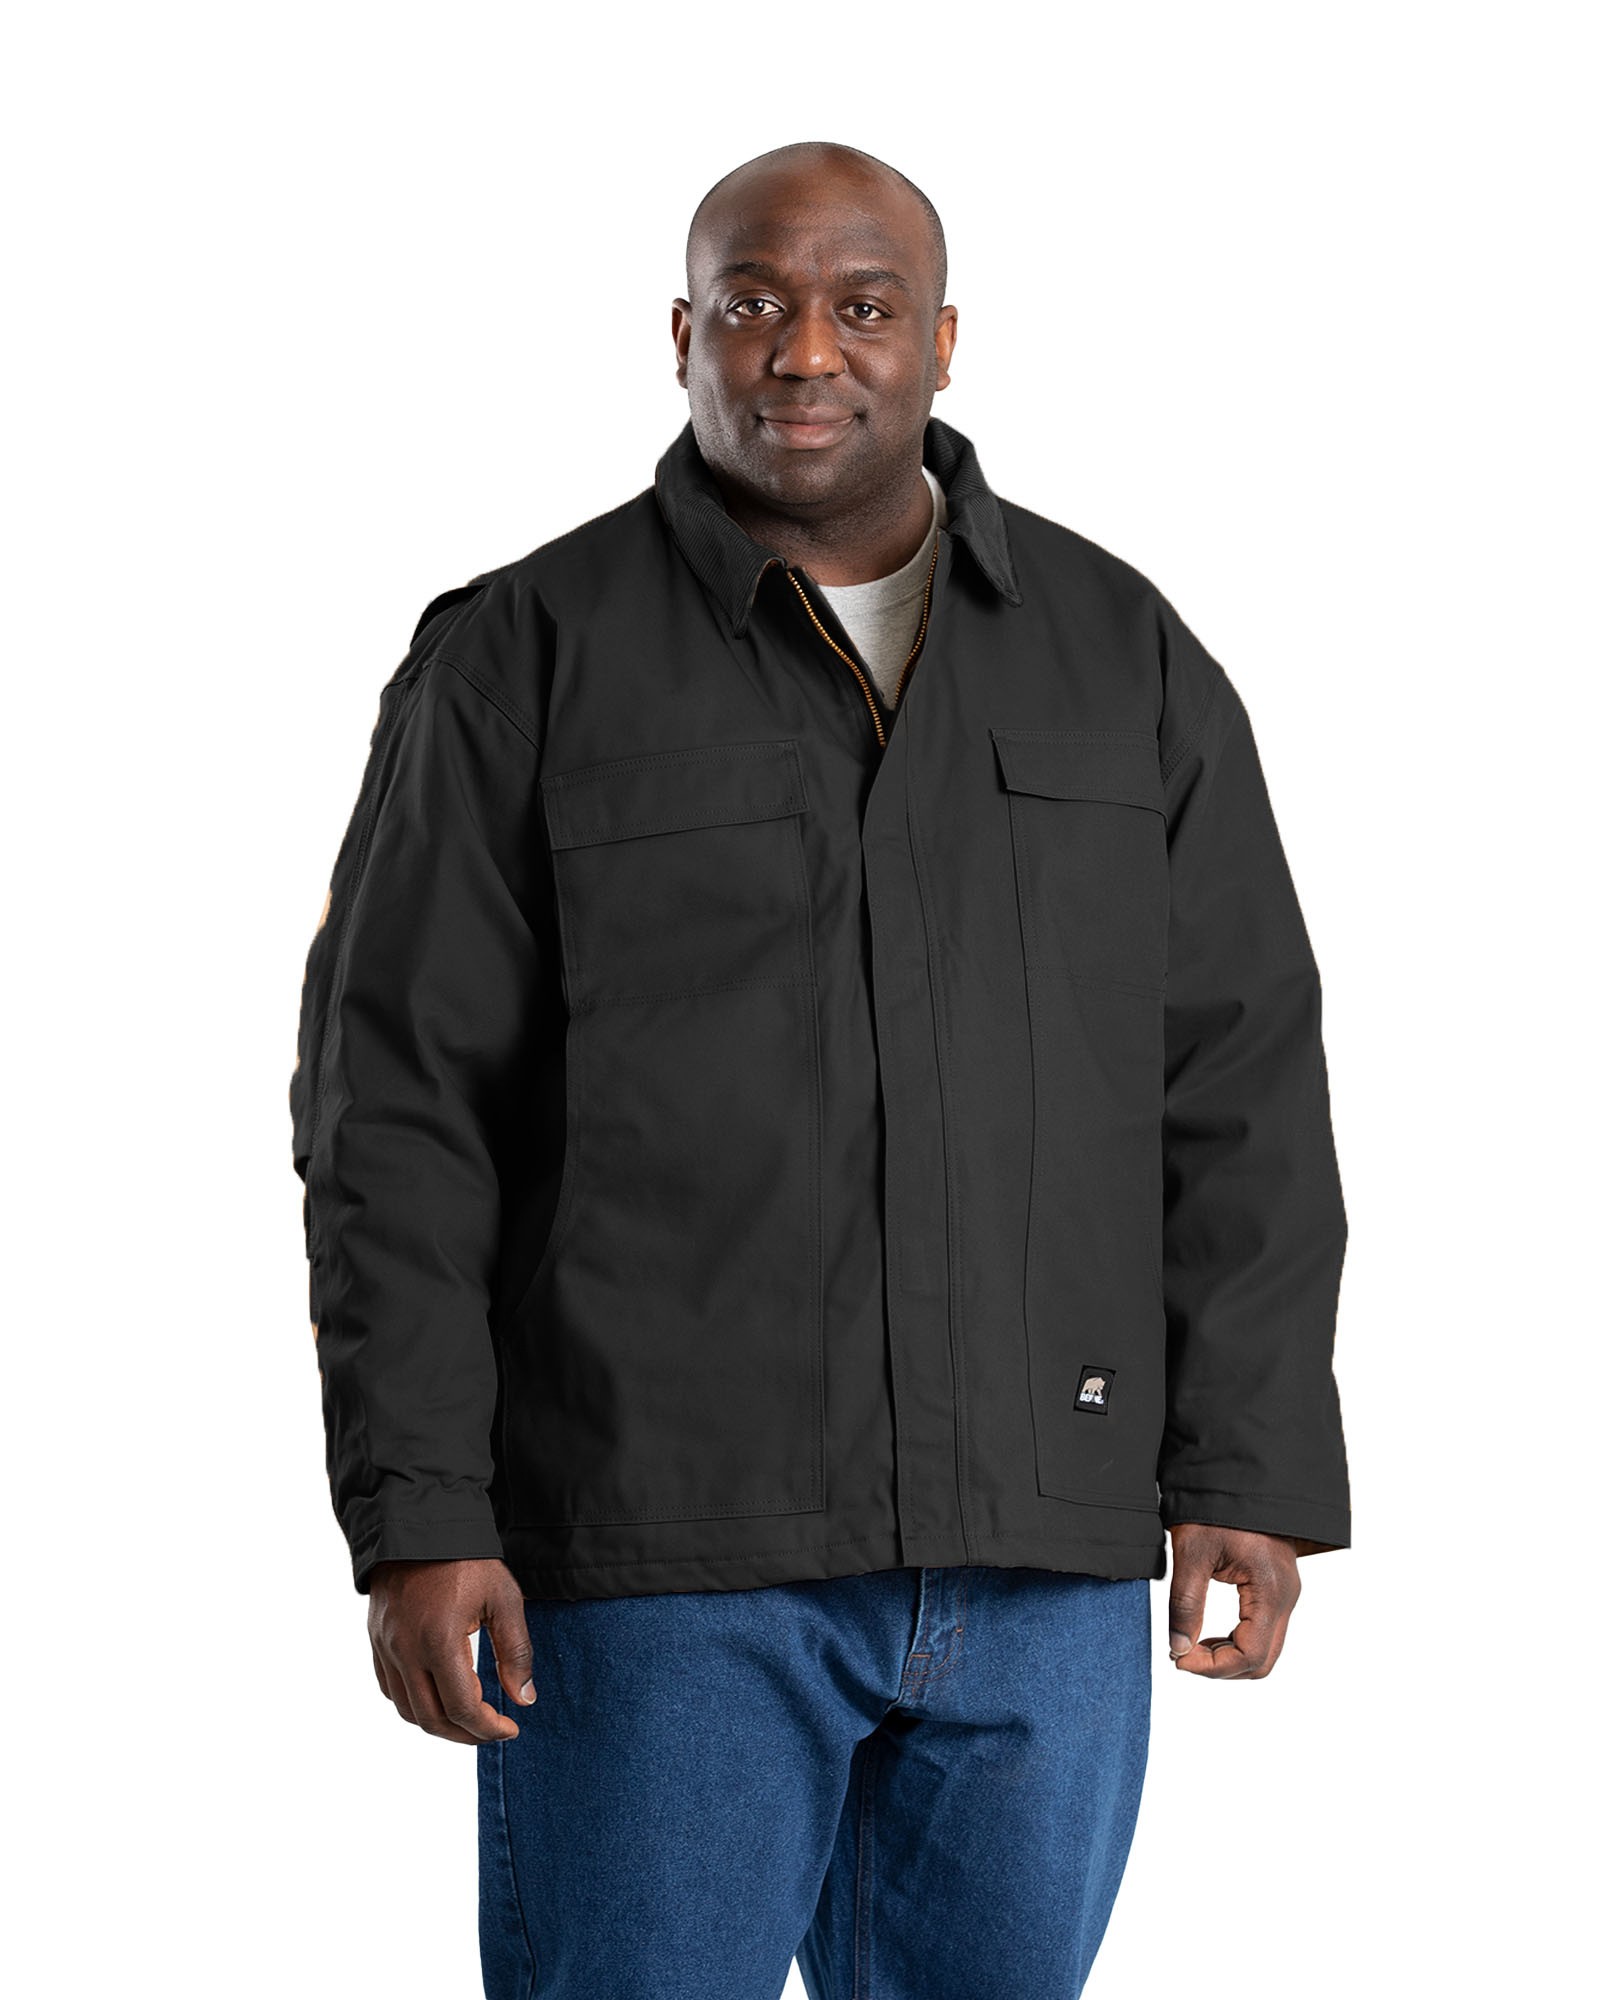 Berne Men's Heritage Duck Insulated Coverall